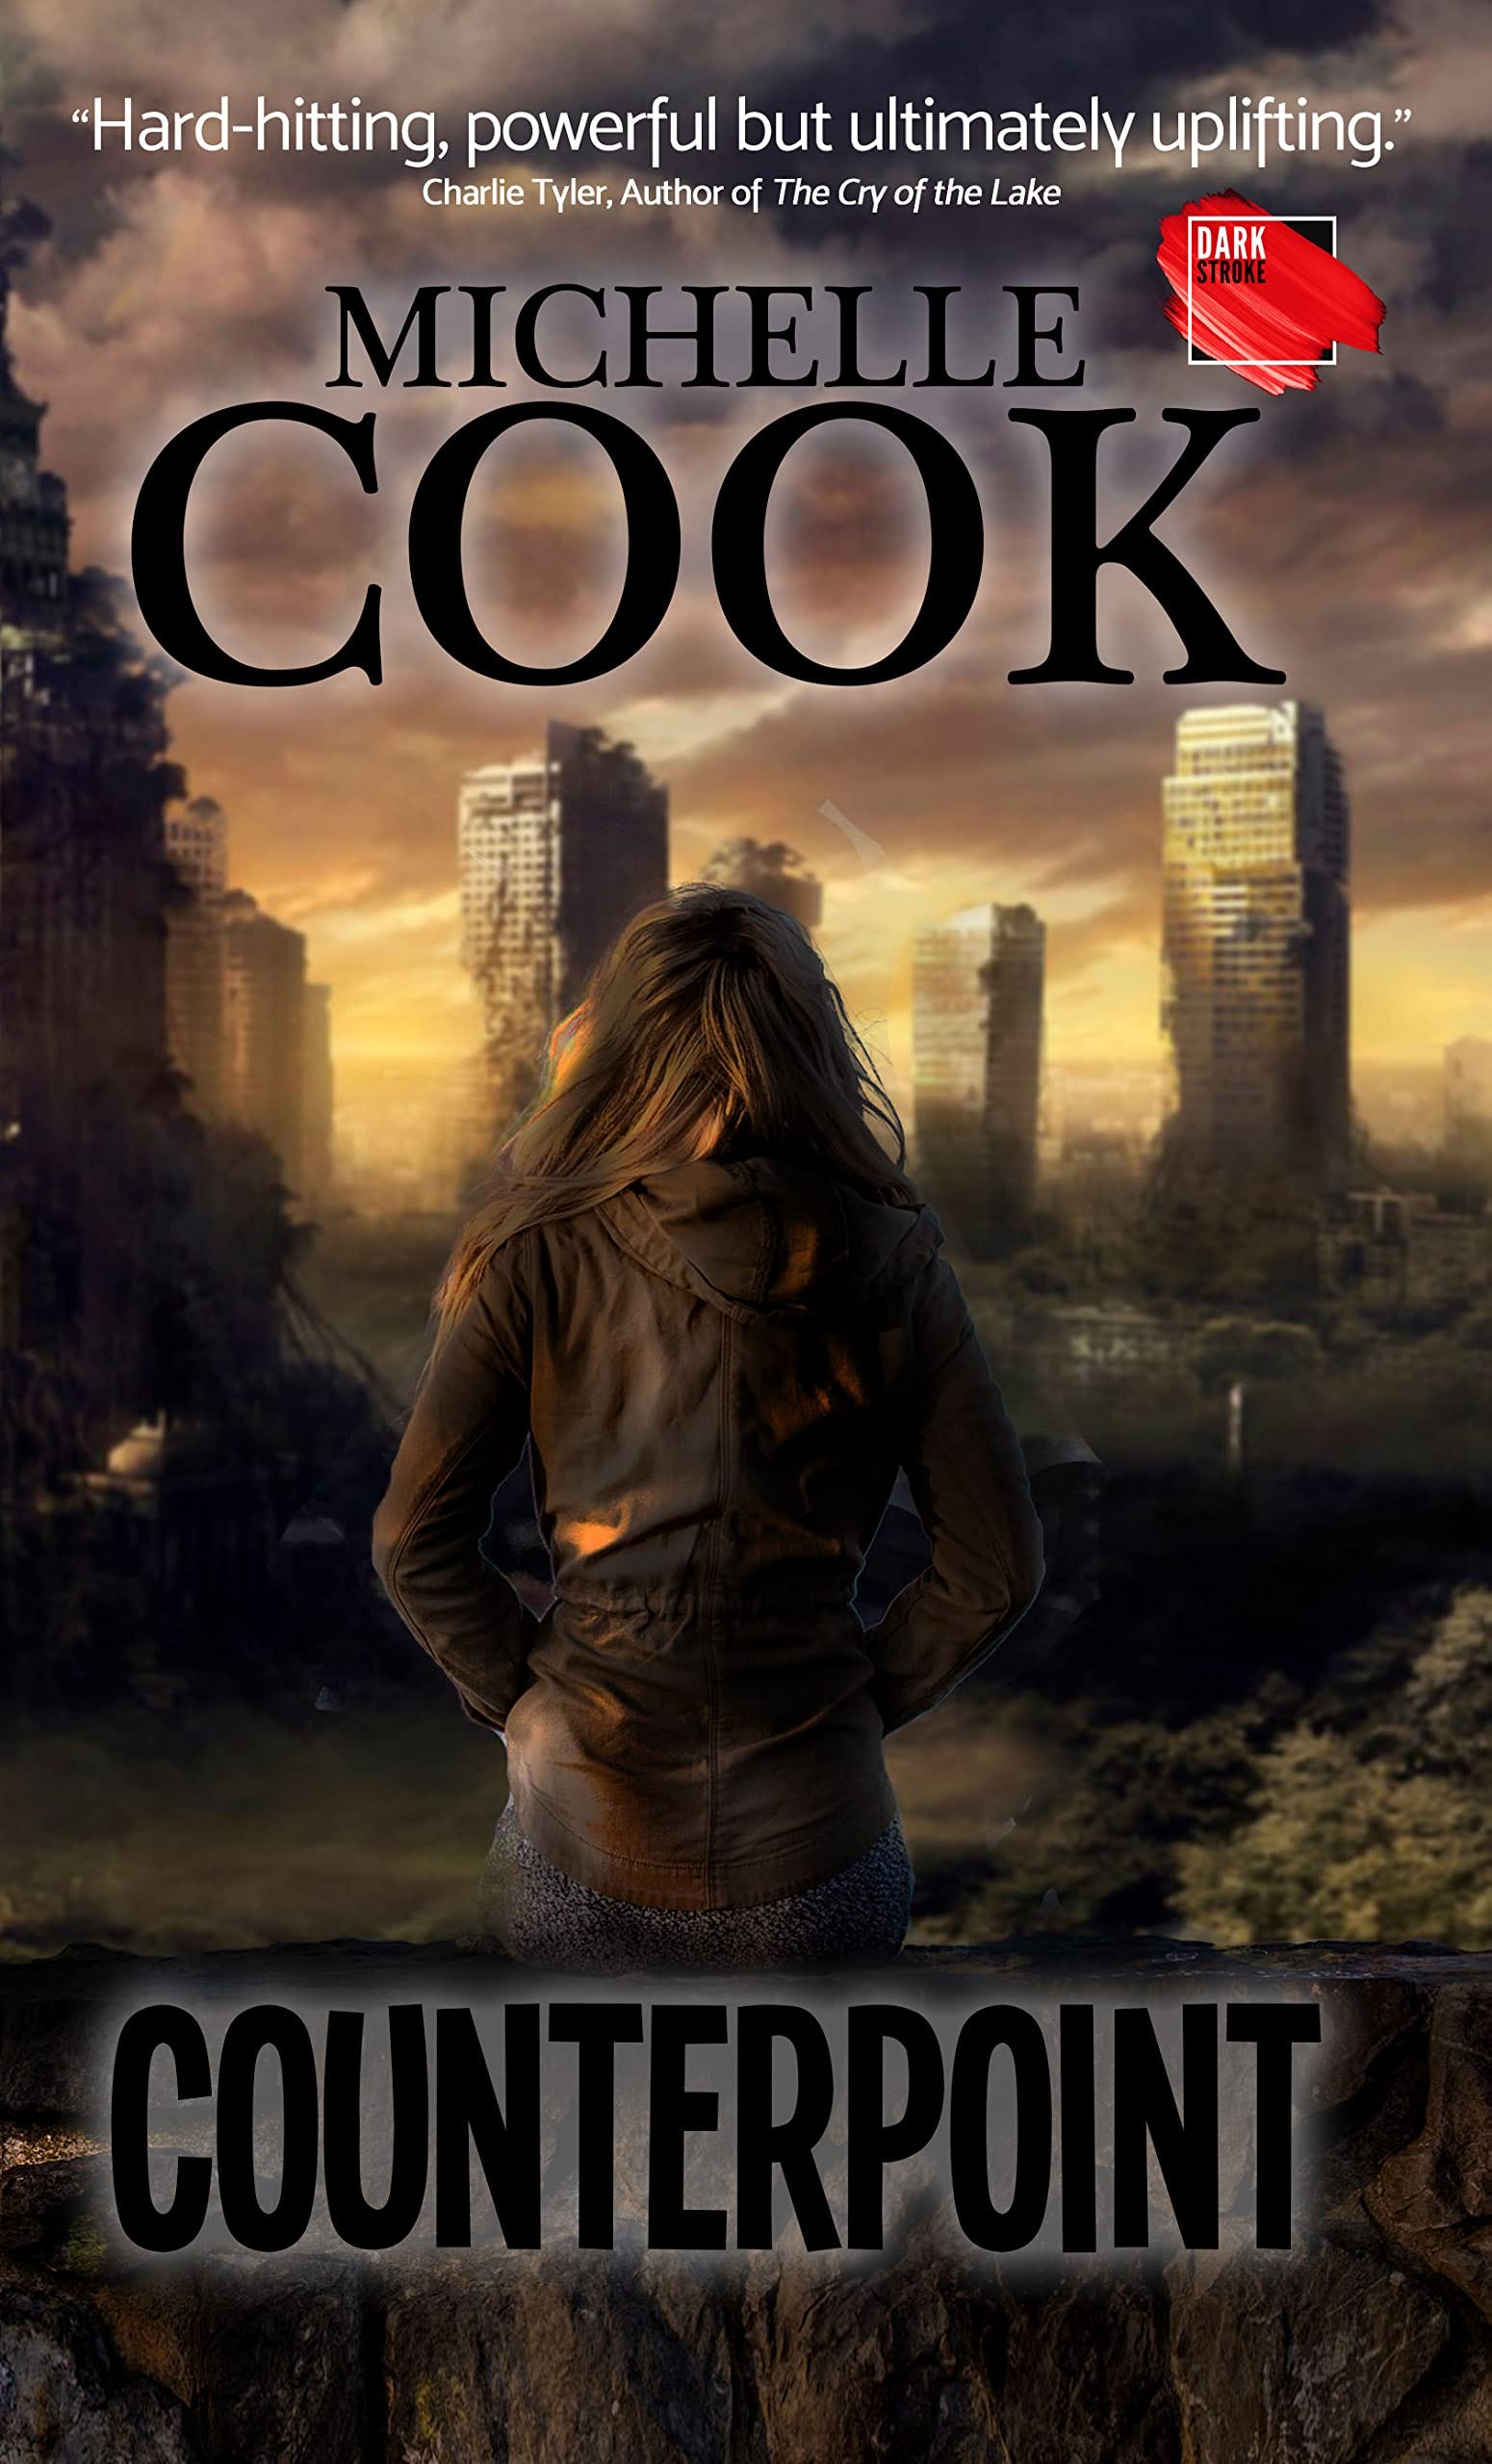 Solarpunk, Cli-Fi: Eco-Fiction Genres to Get You Excited About the